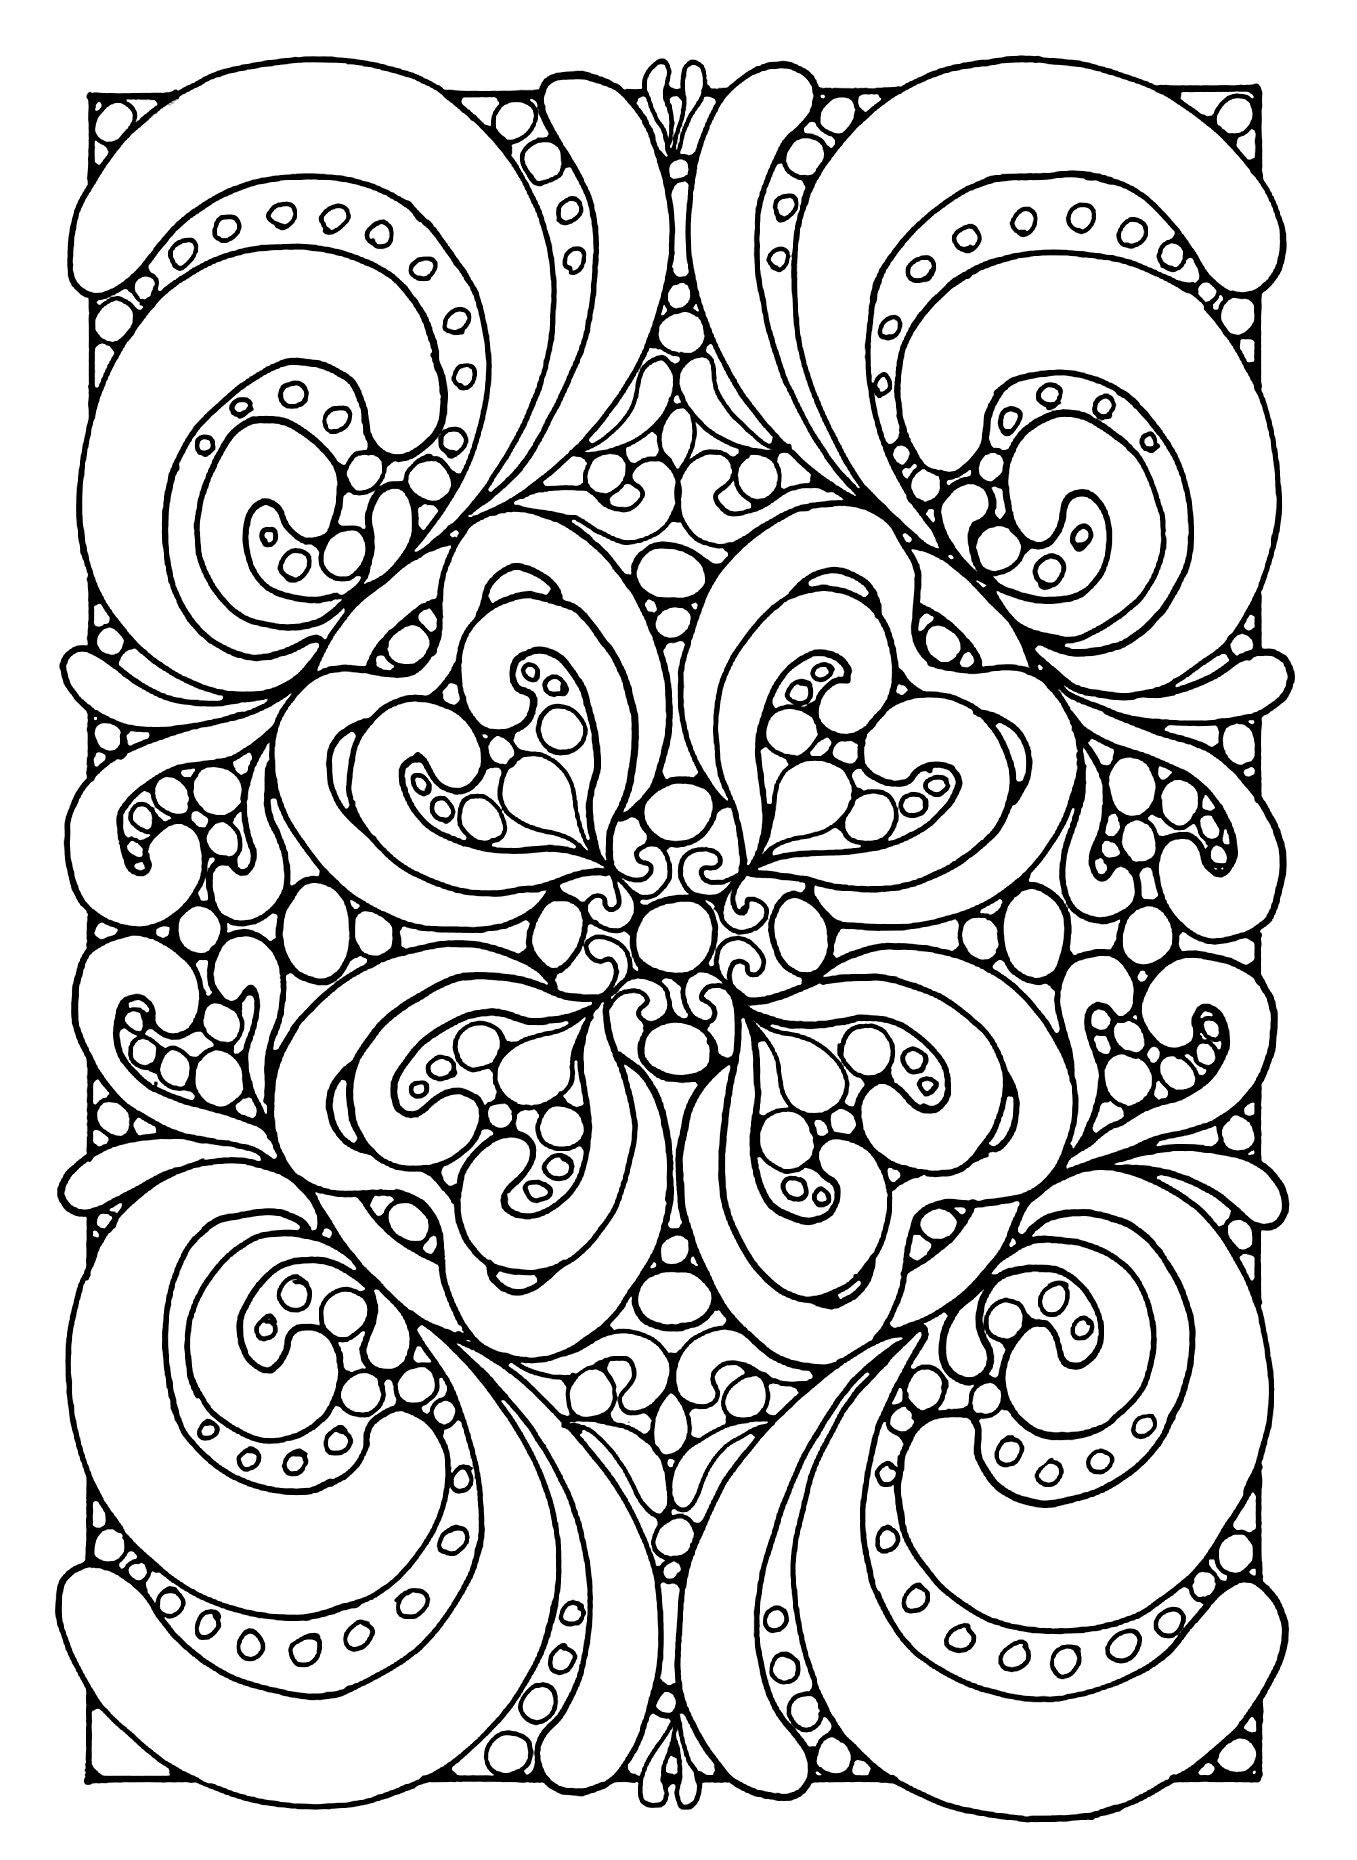 Abstract zen - Anti stress Adult Coloring Pages - Page 2/